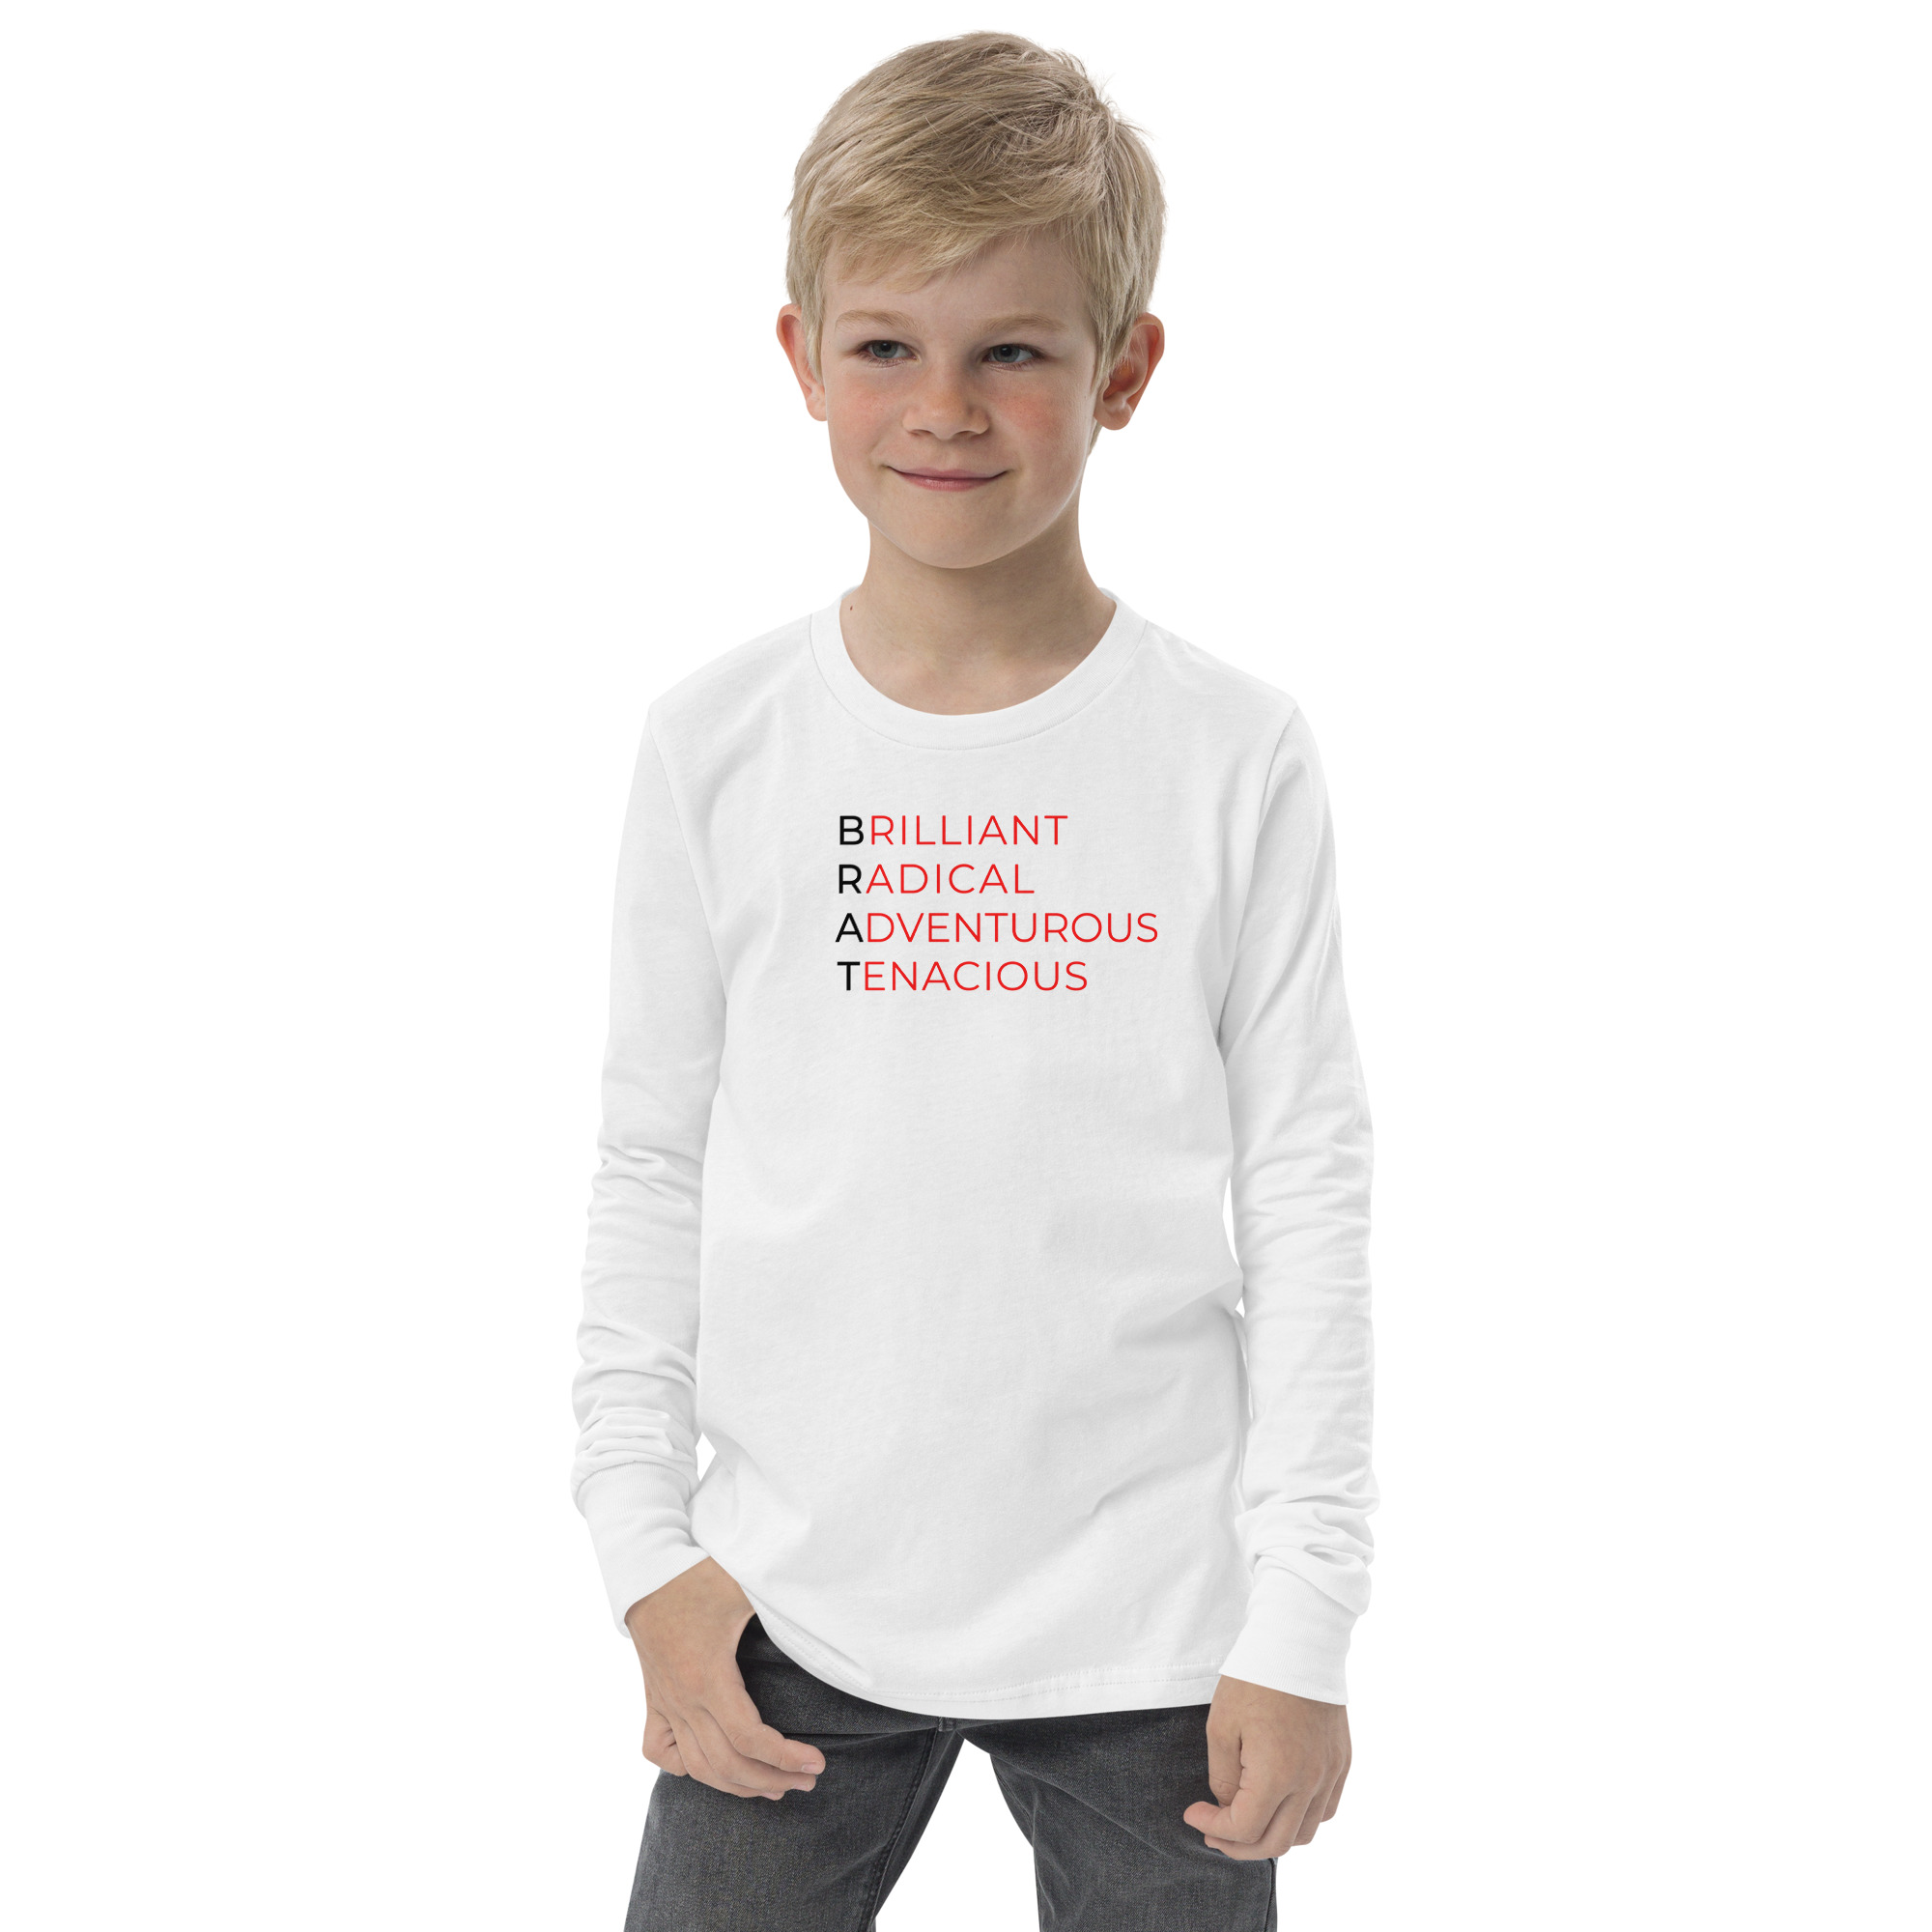 youth-long-sleeve-tee-white-front-6384c46157582.jpg